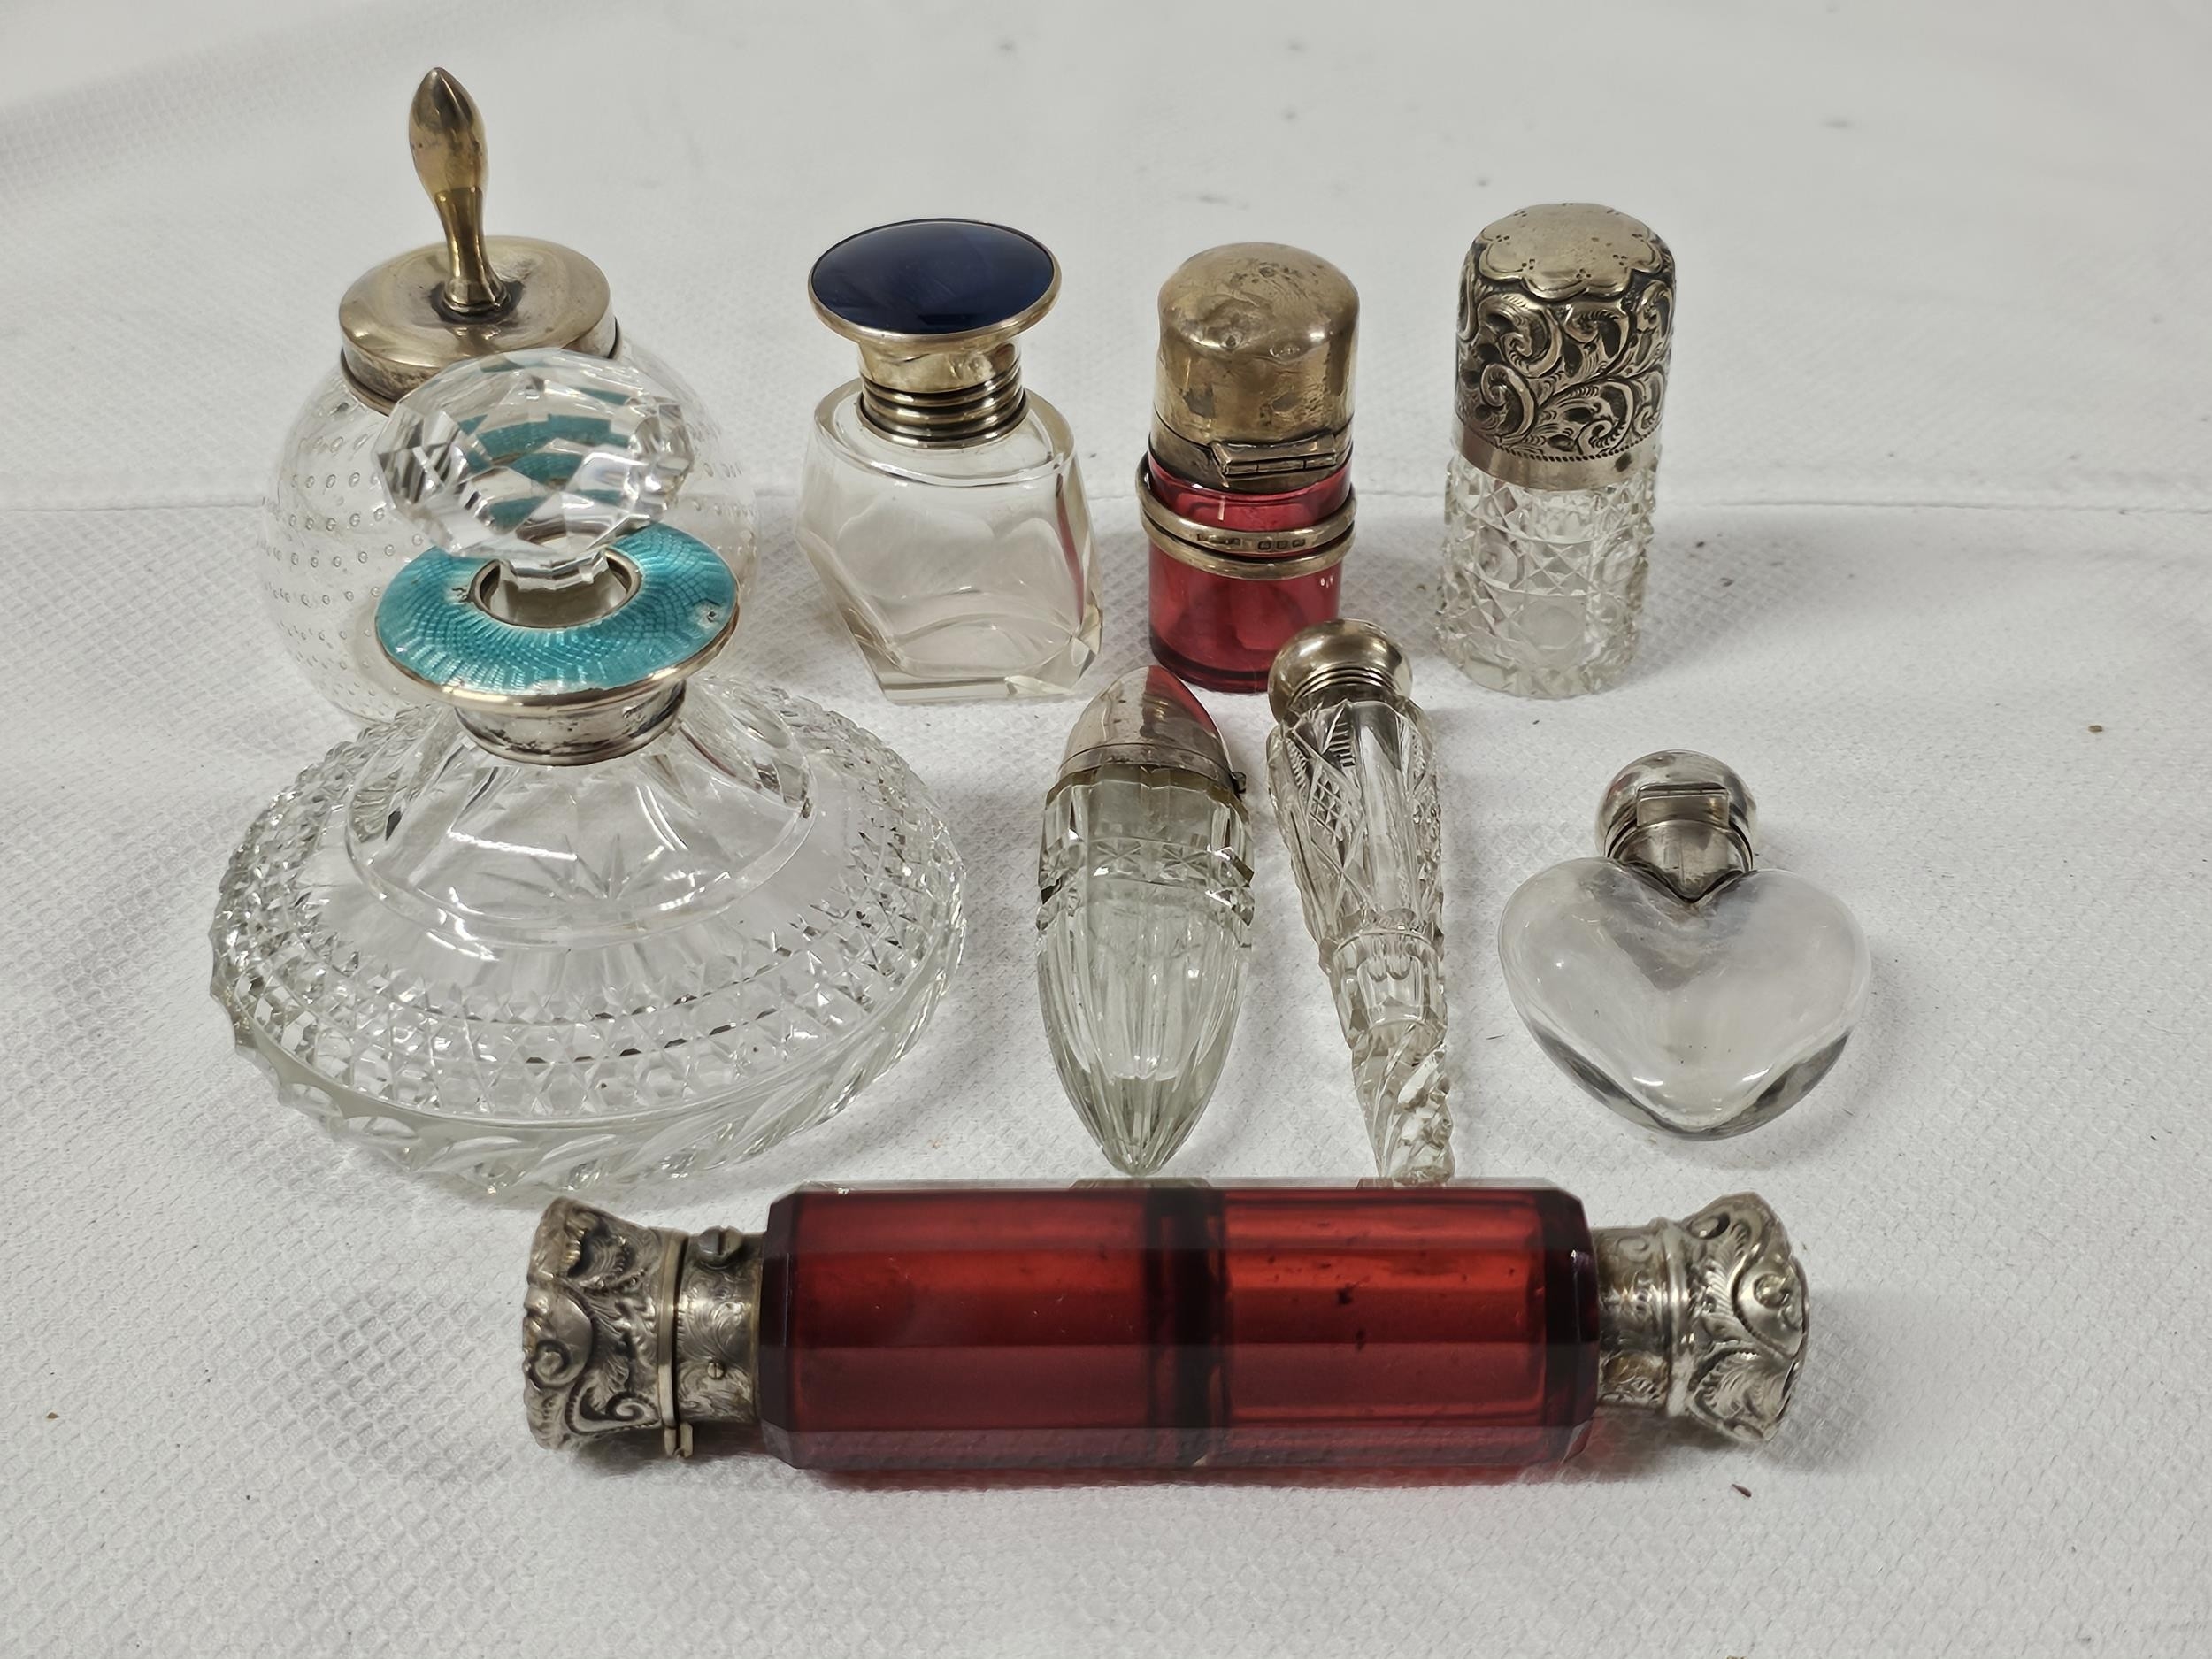 A collection of nine 19th century and early 20th century silver and white metal topped and perfume